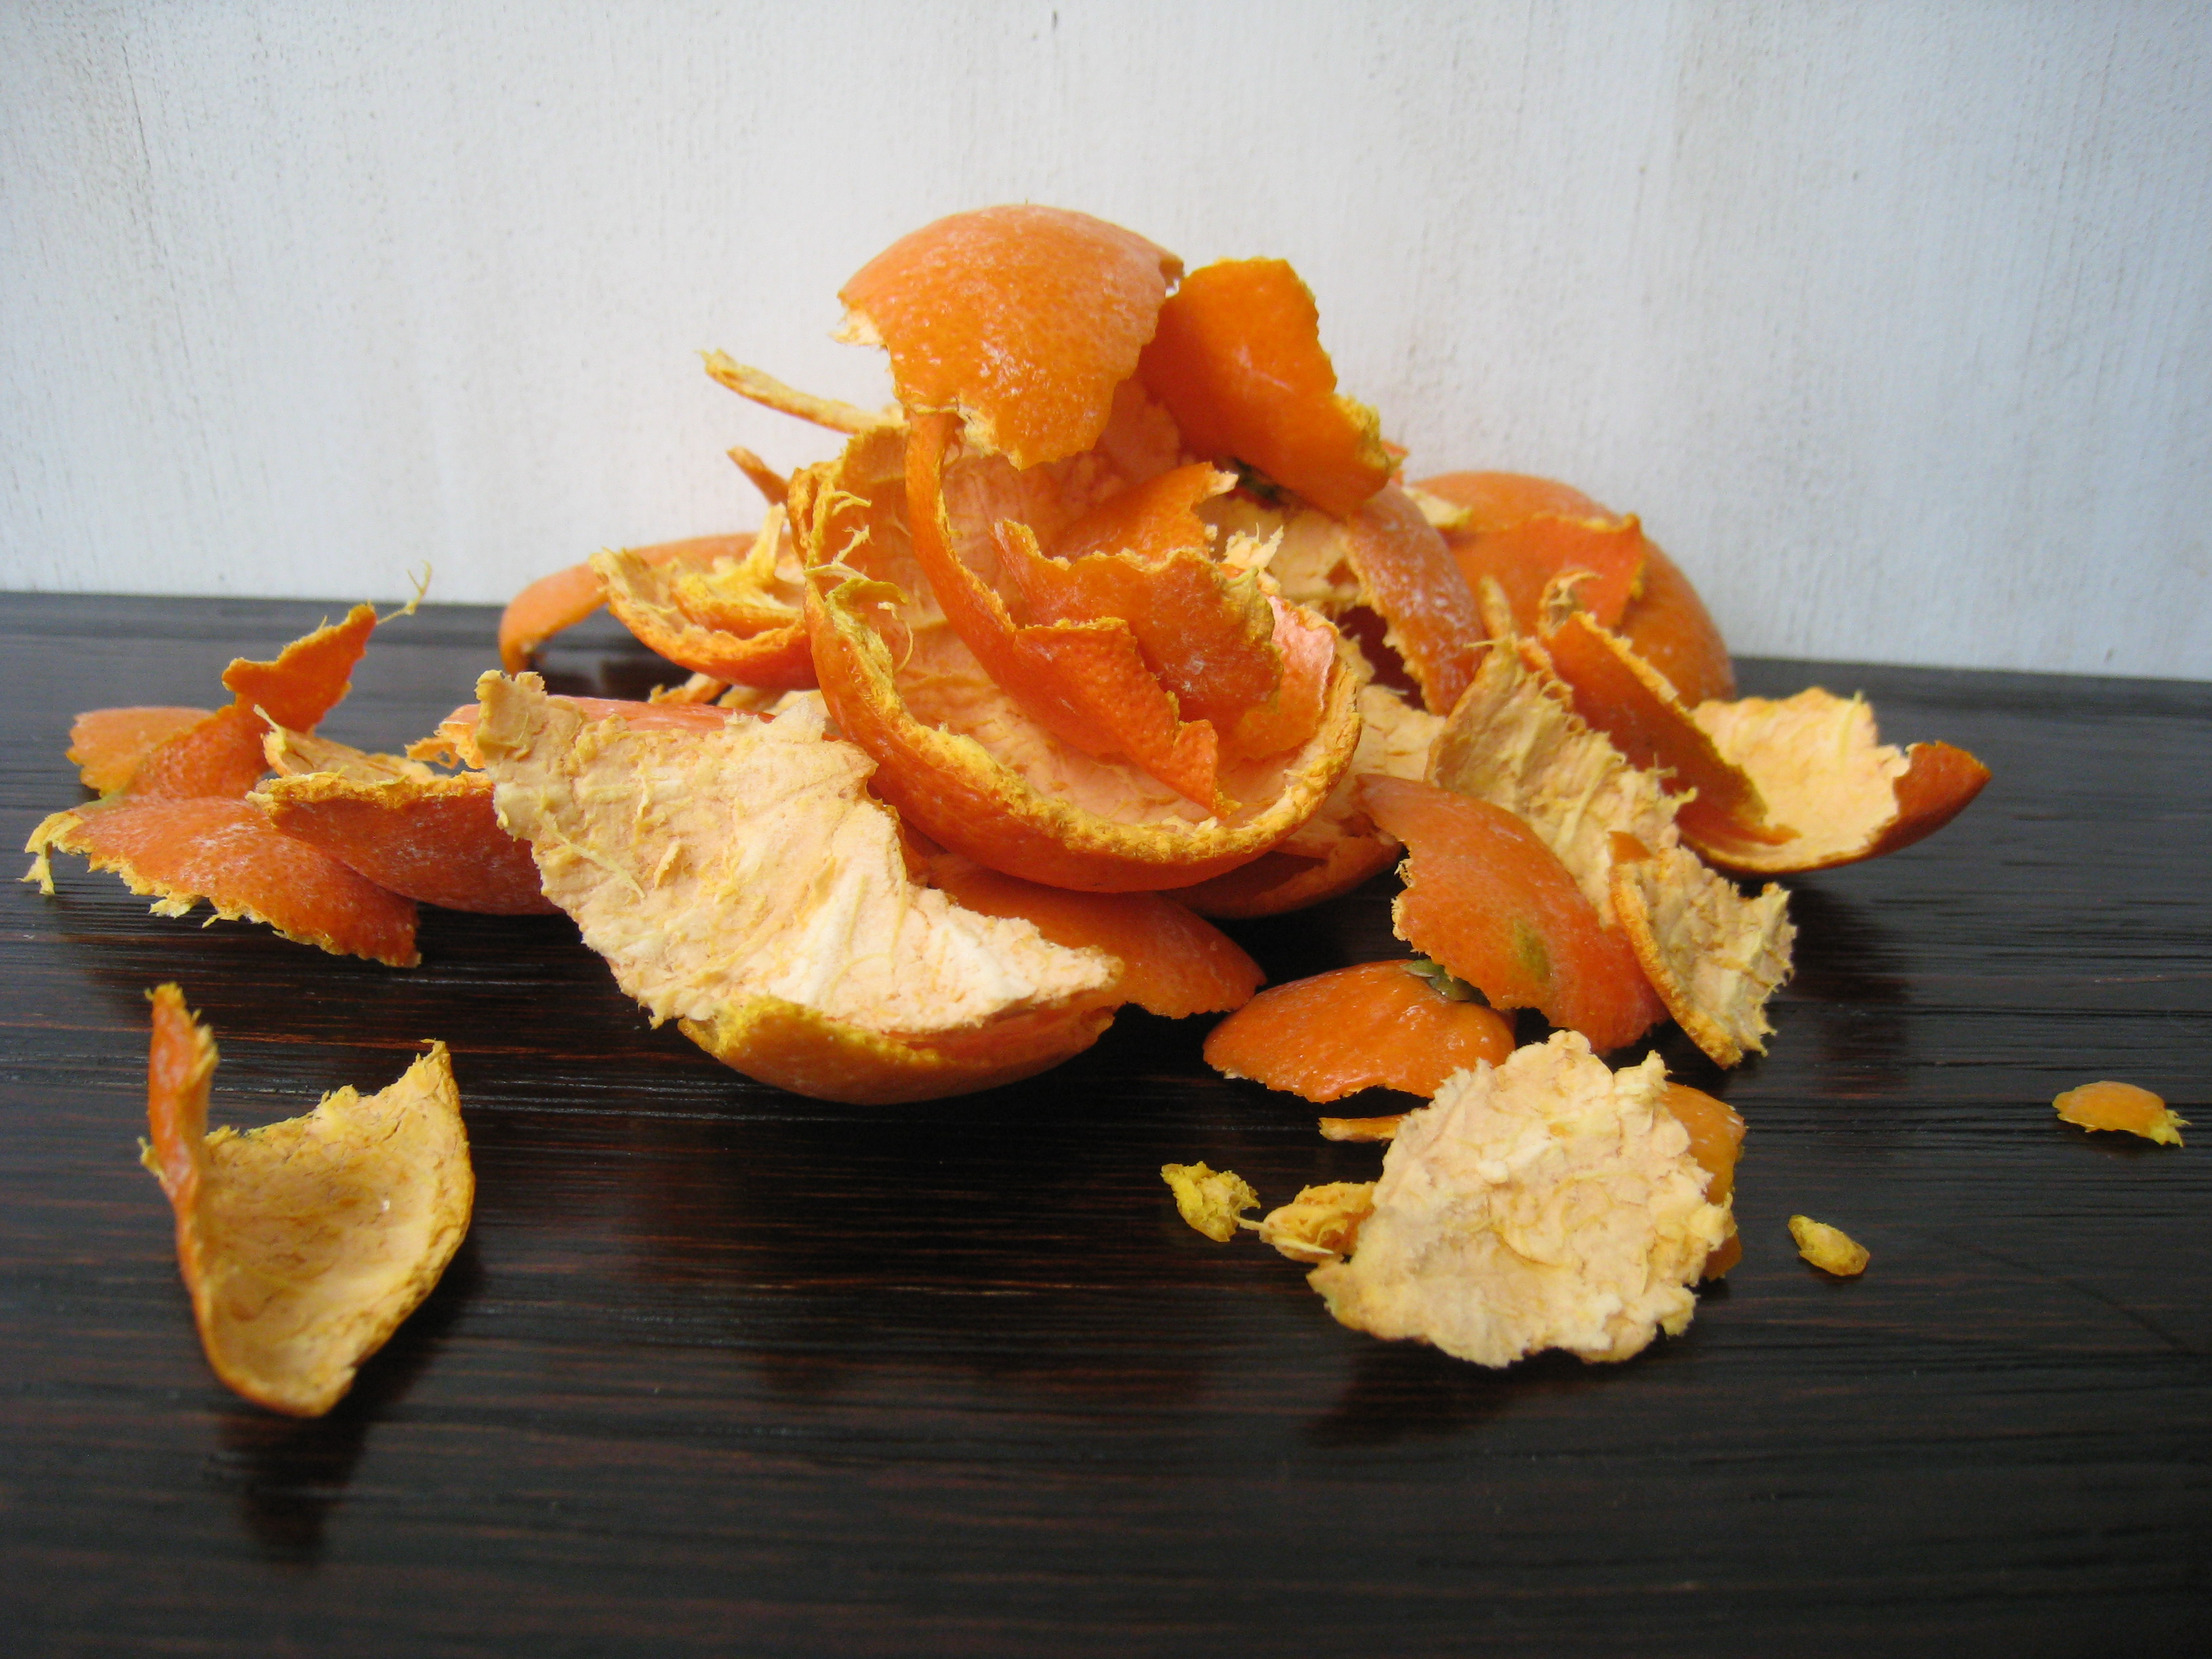 How To Use Orange Peel Fertilizer For Your Plants